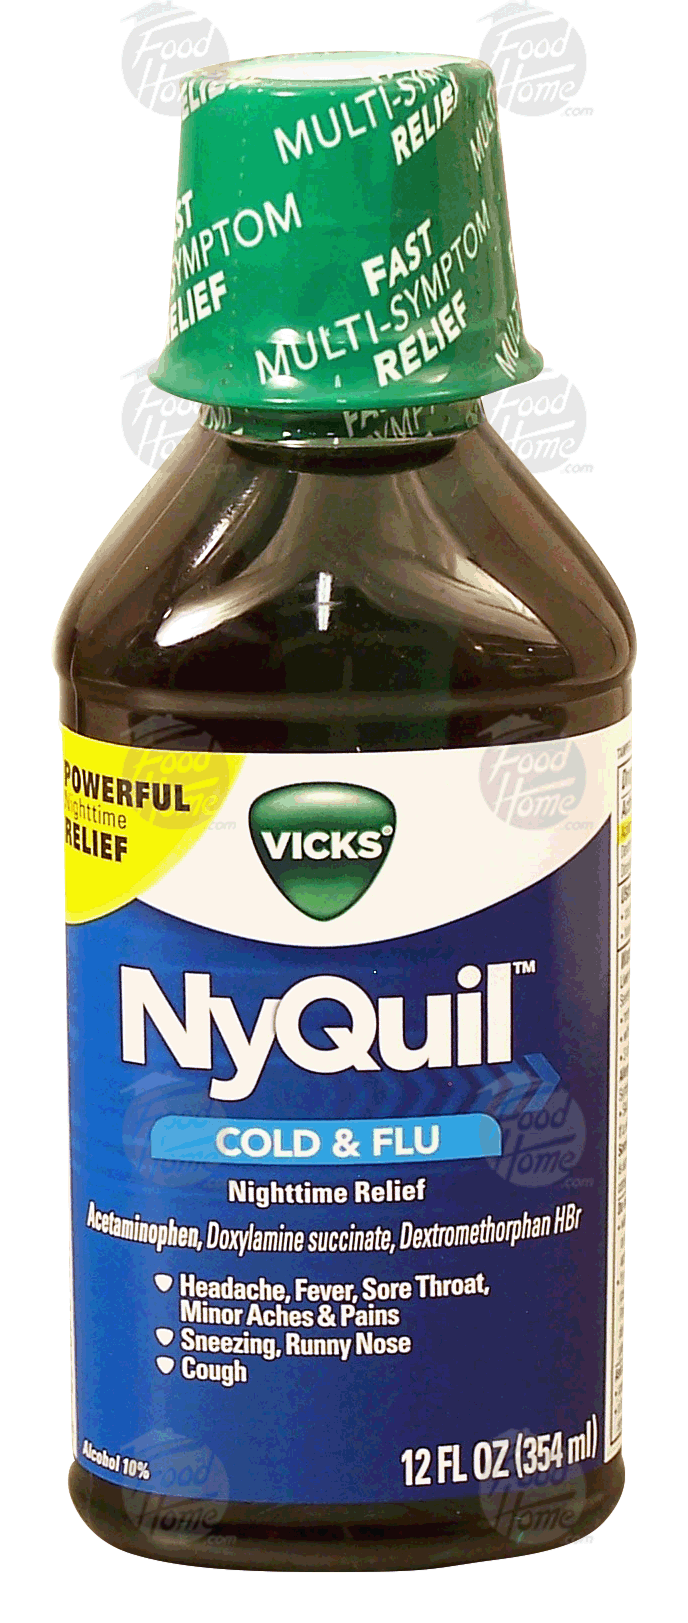 Vicks NyQuil cold & flu nighttime relief liquid, acetaminophen, doxylamine, dextromethorphan Full-Size Picture